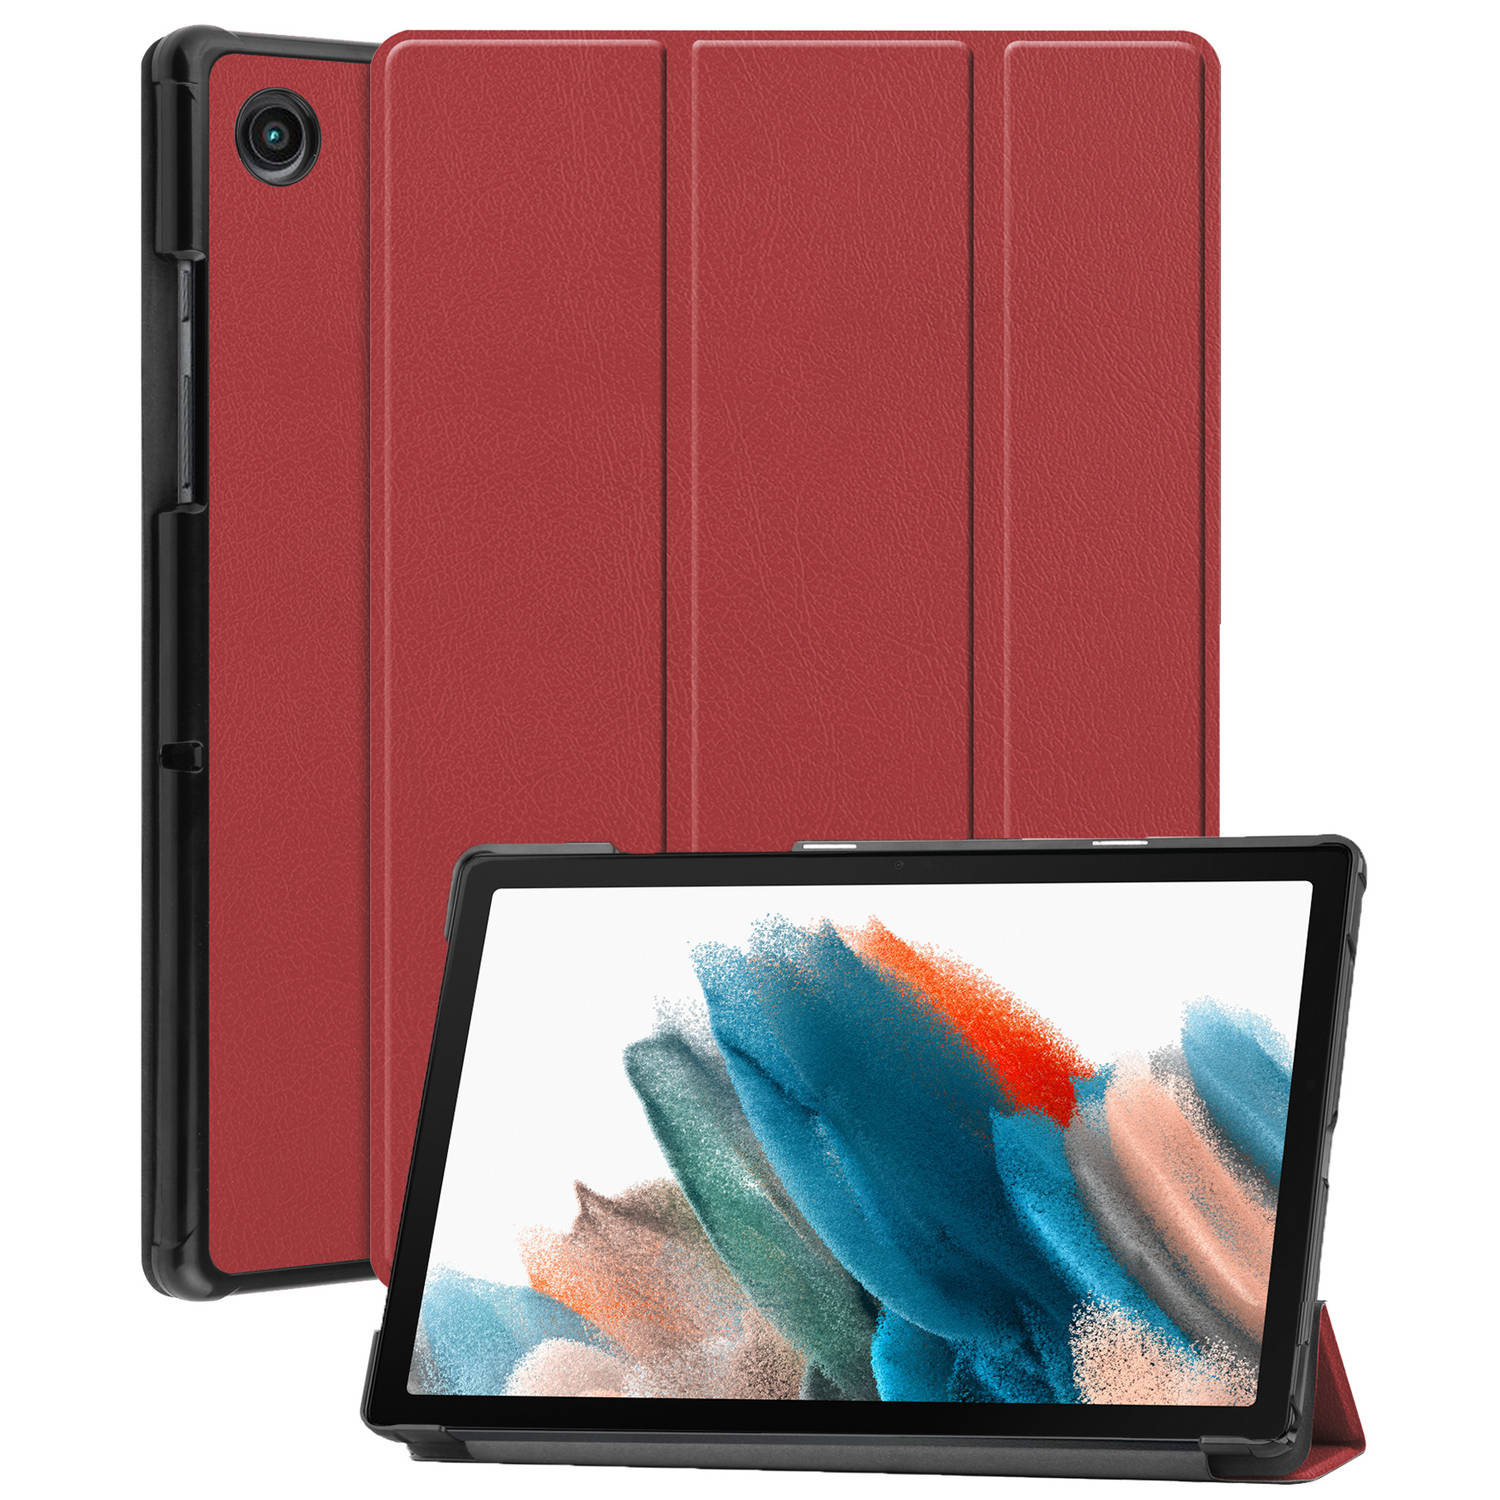 Basey Samsung Galaxy Tab A8 Hoesje Kunstleer Hoes Case Cover Donkerrood